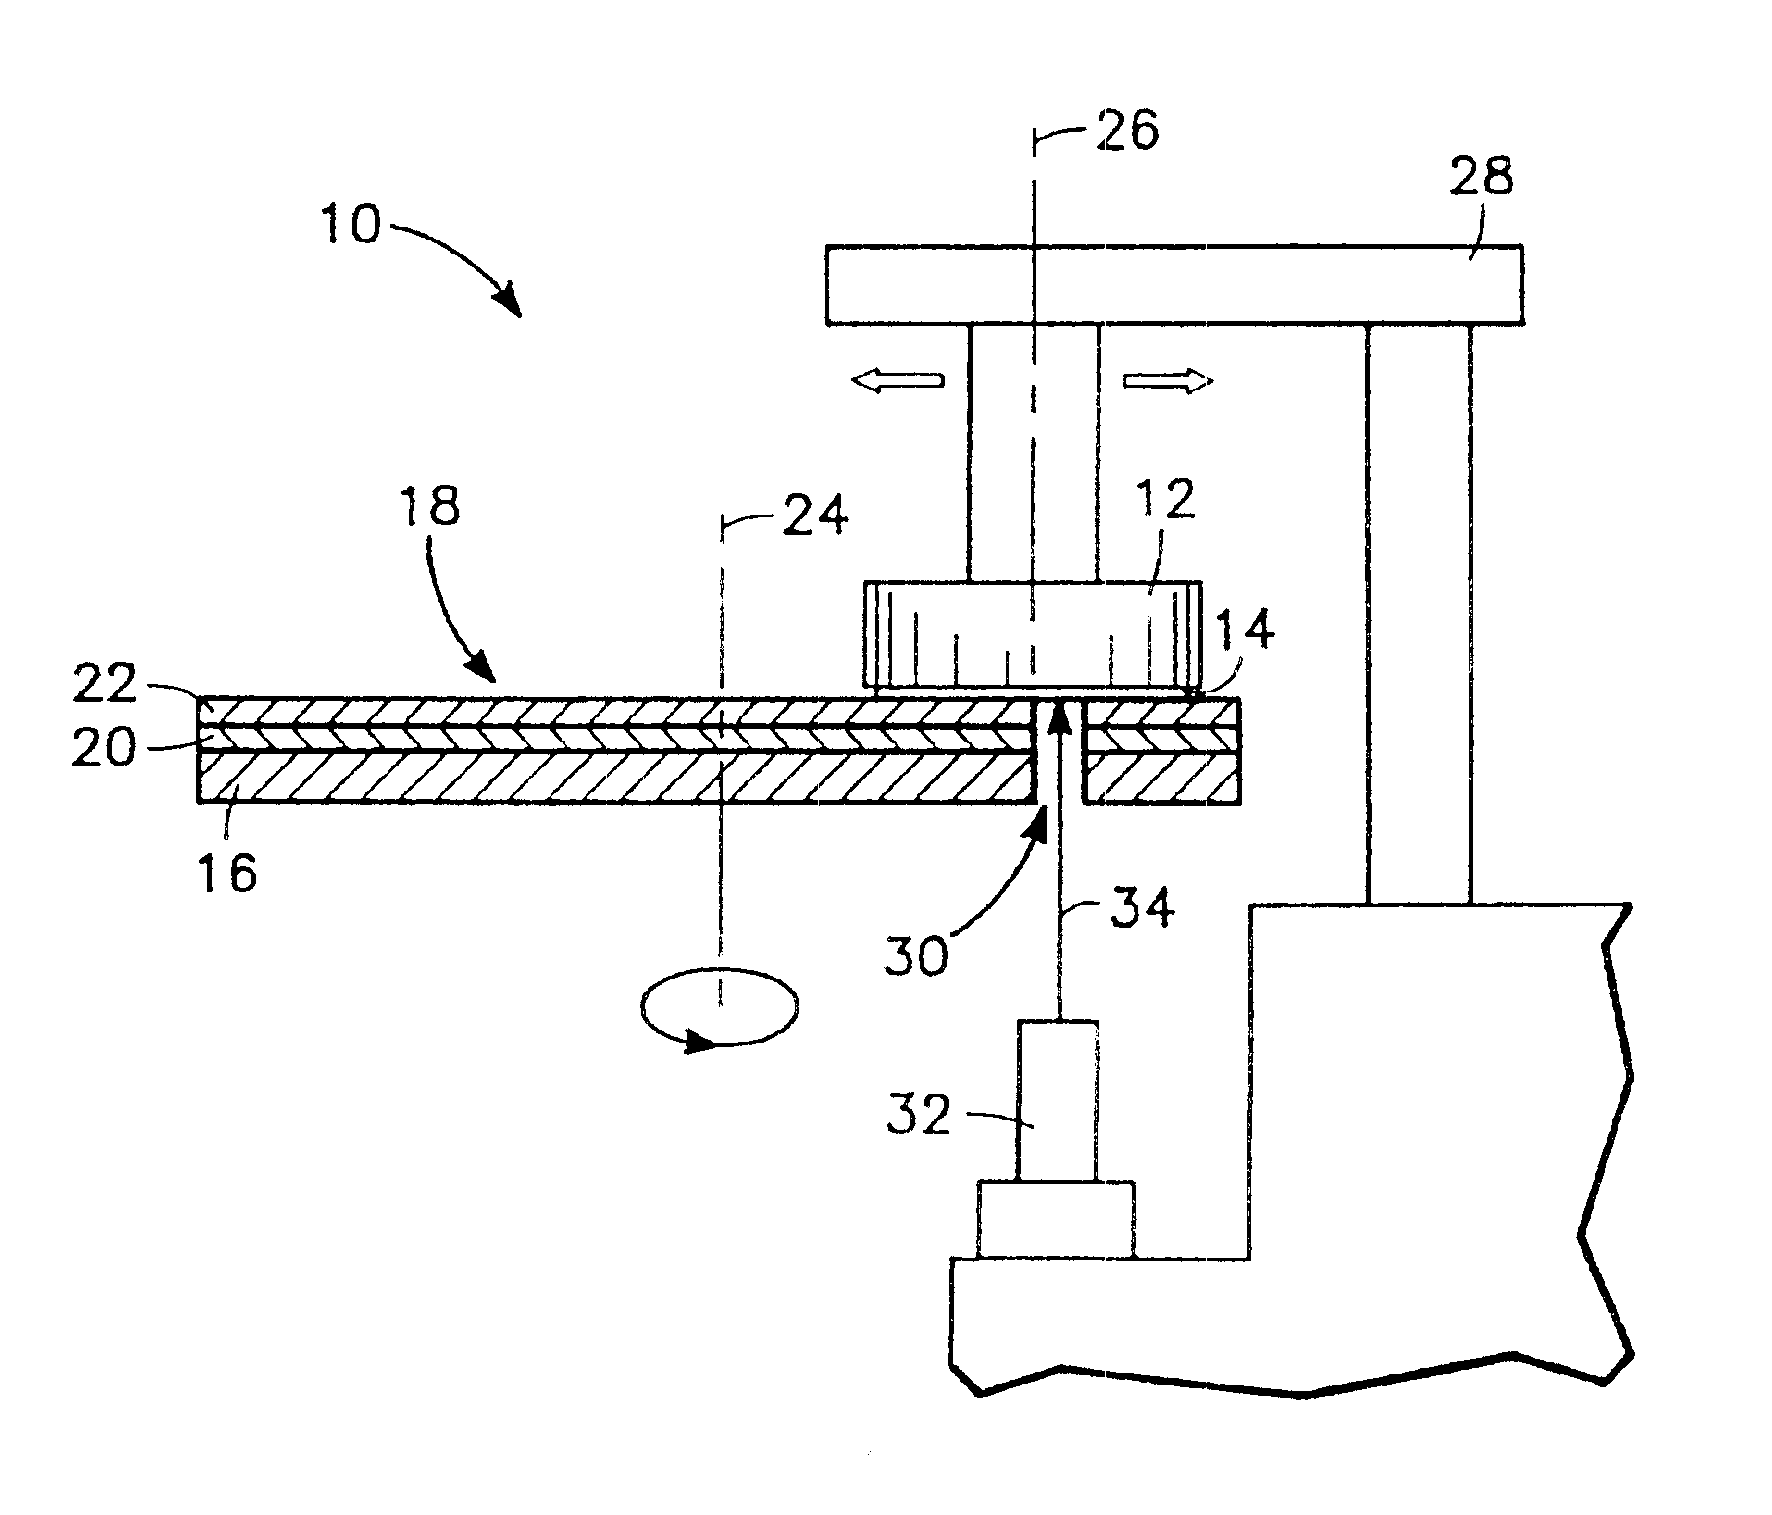 Apparatus and method for in-situ endpoint detection for chemical mechanical polishing operations